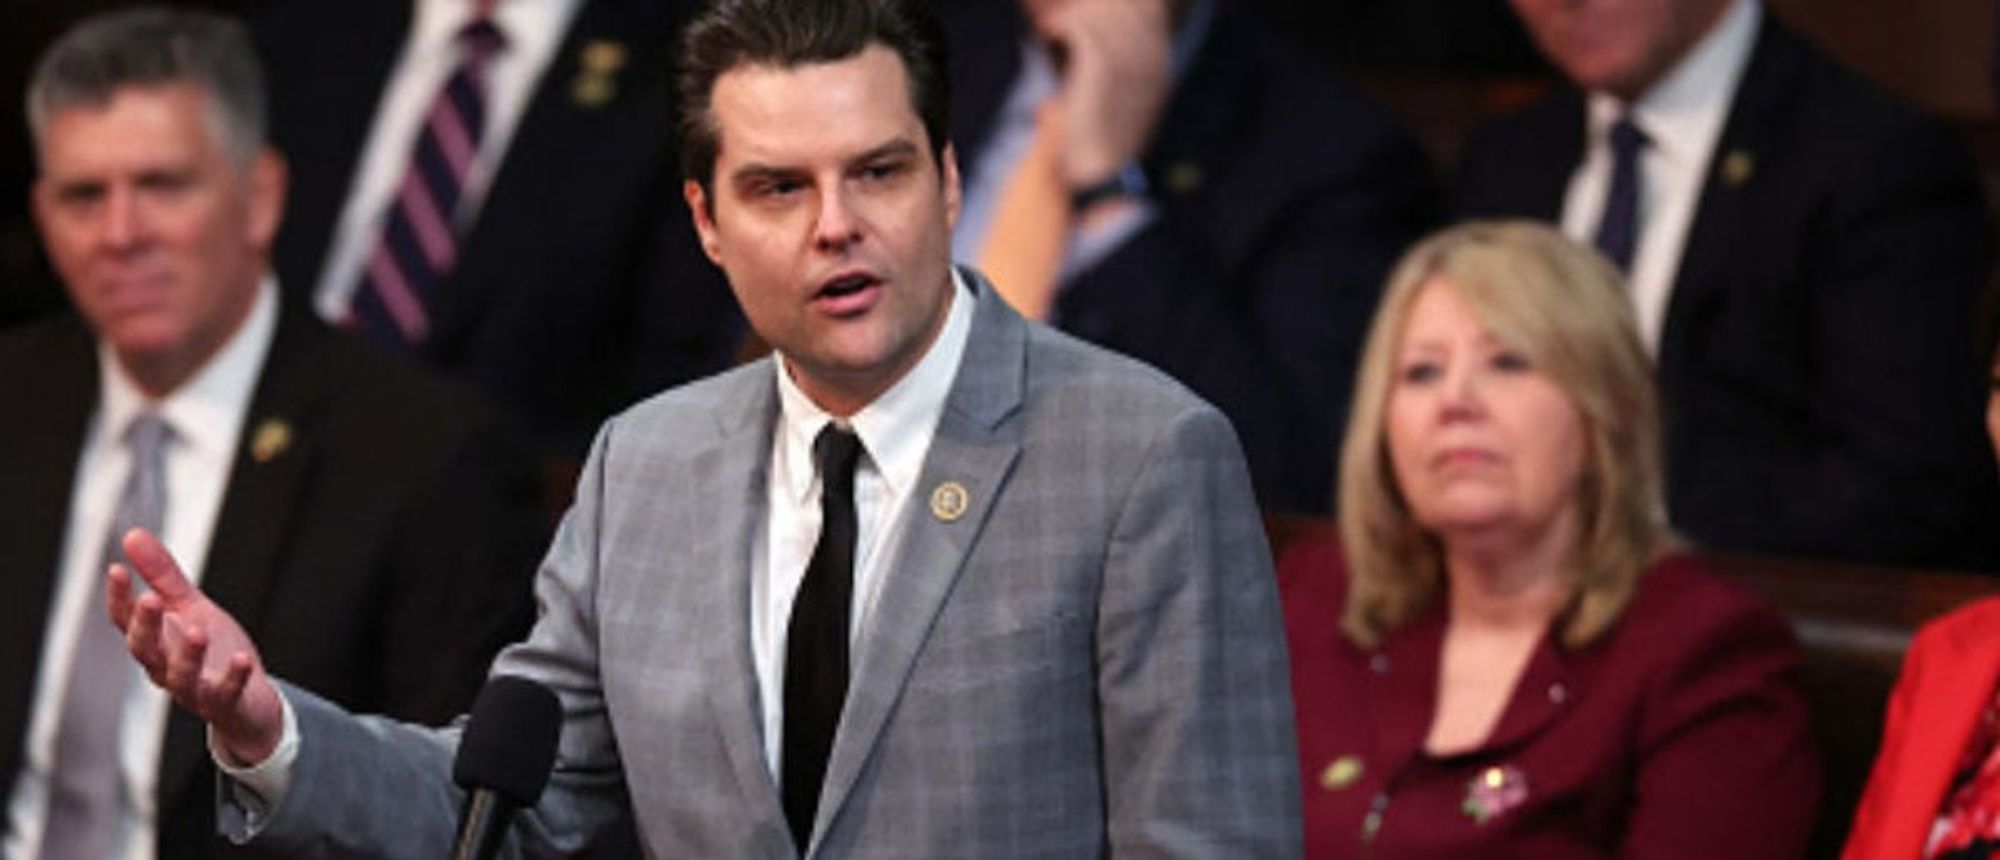 Doj Declines To Charge Rep Matt Gaetz After Sex Trafficking Probe Conservative Review